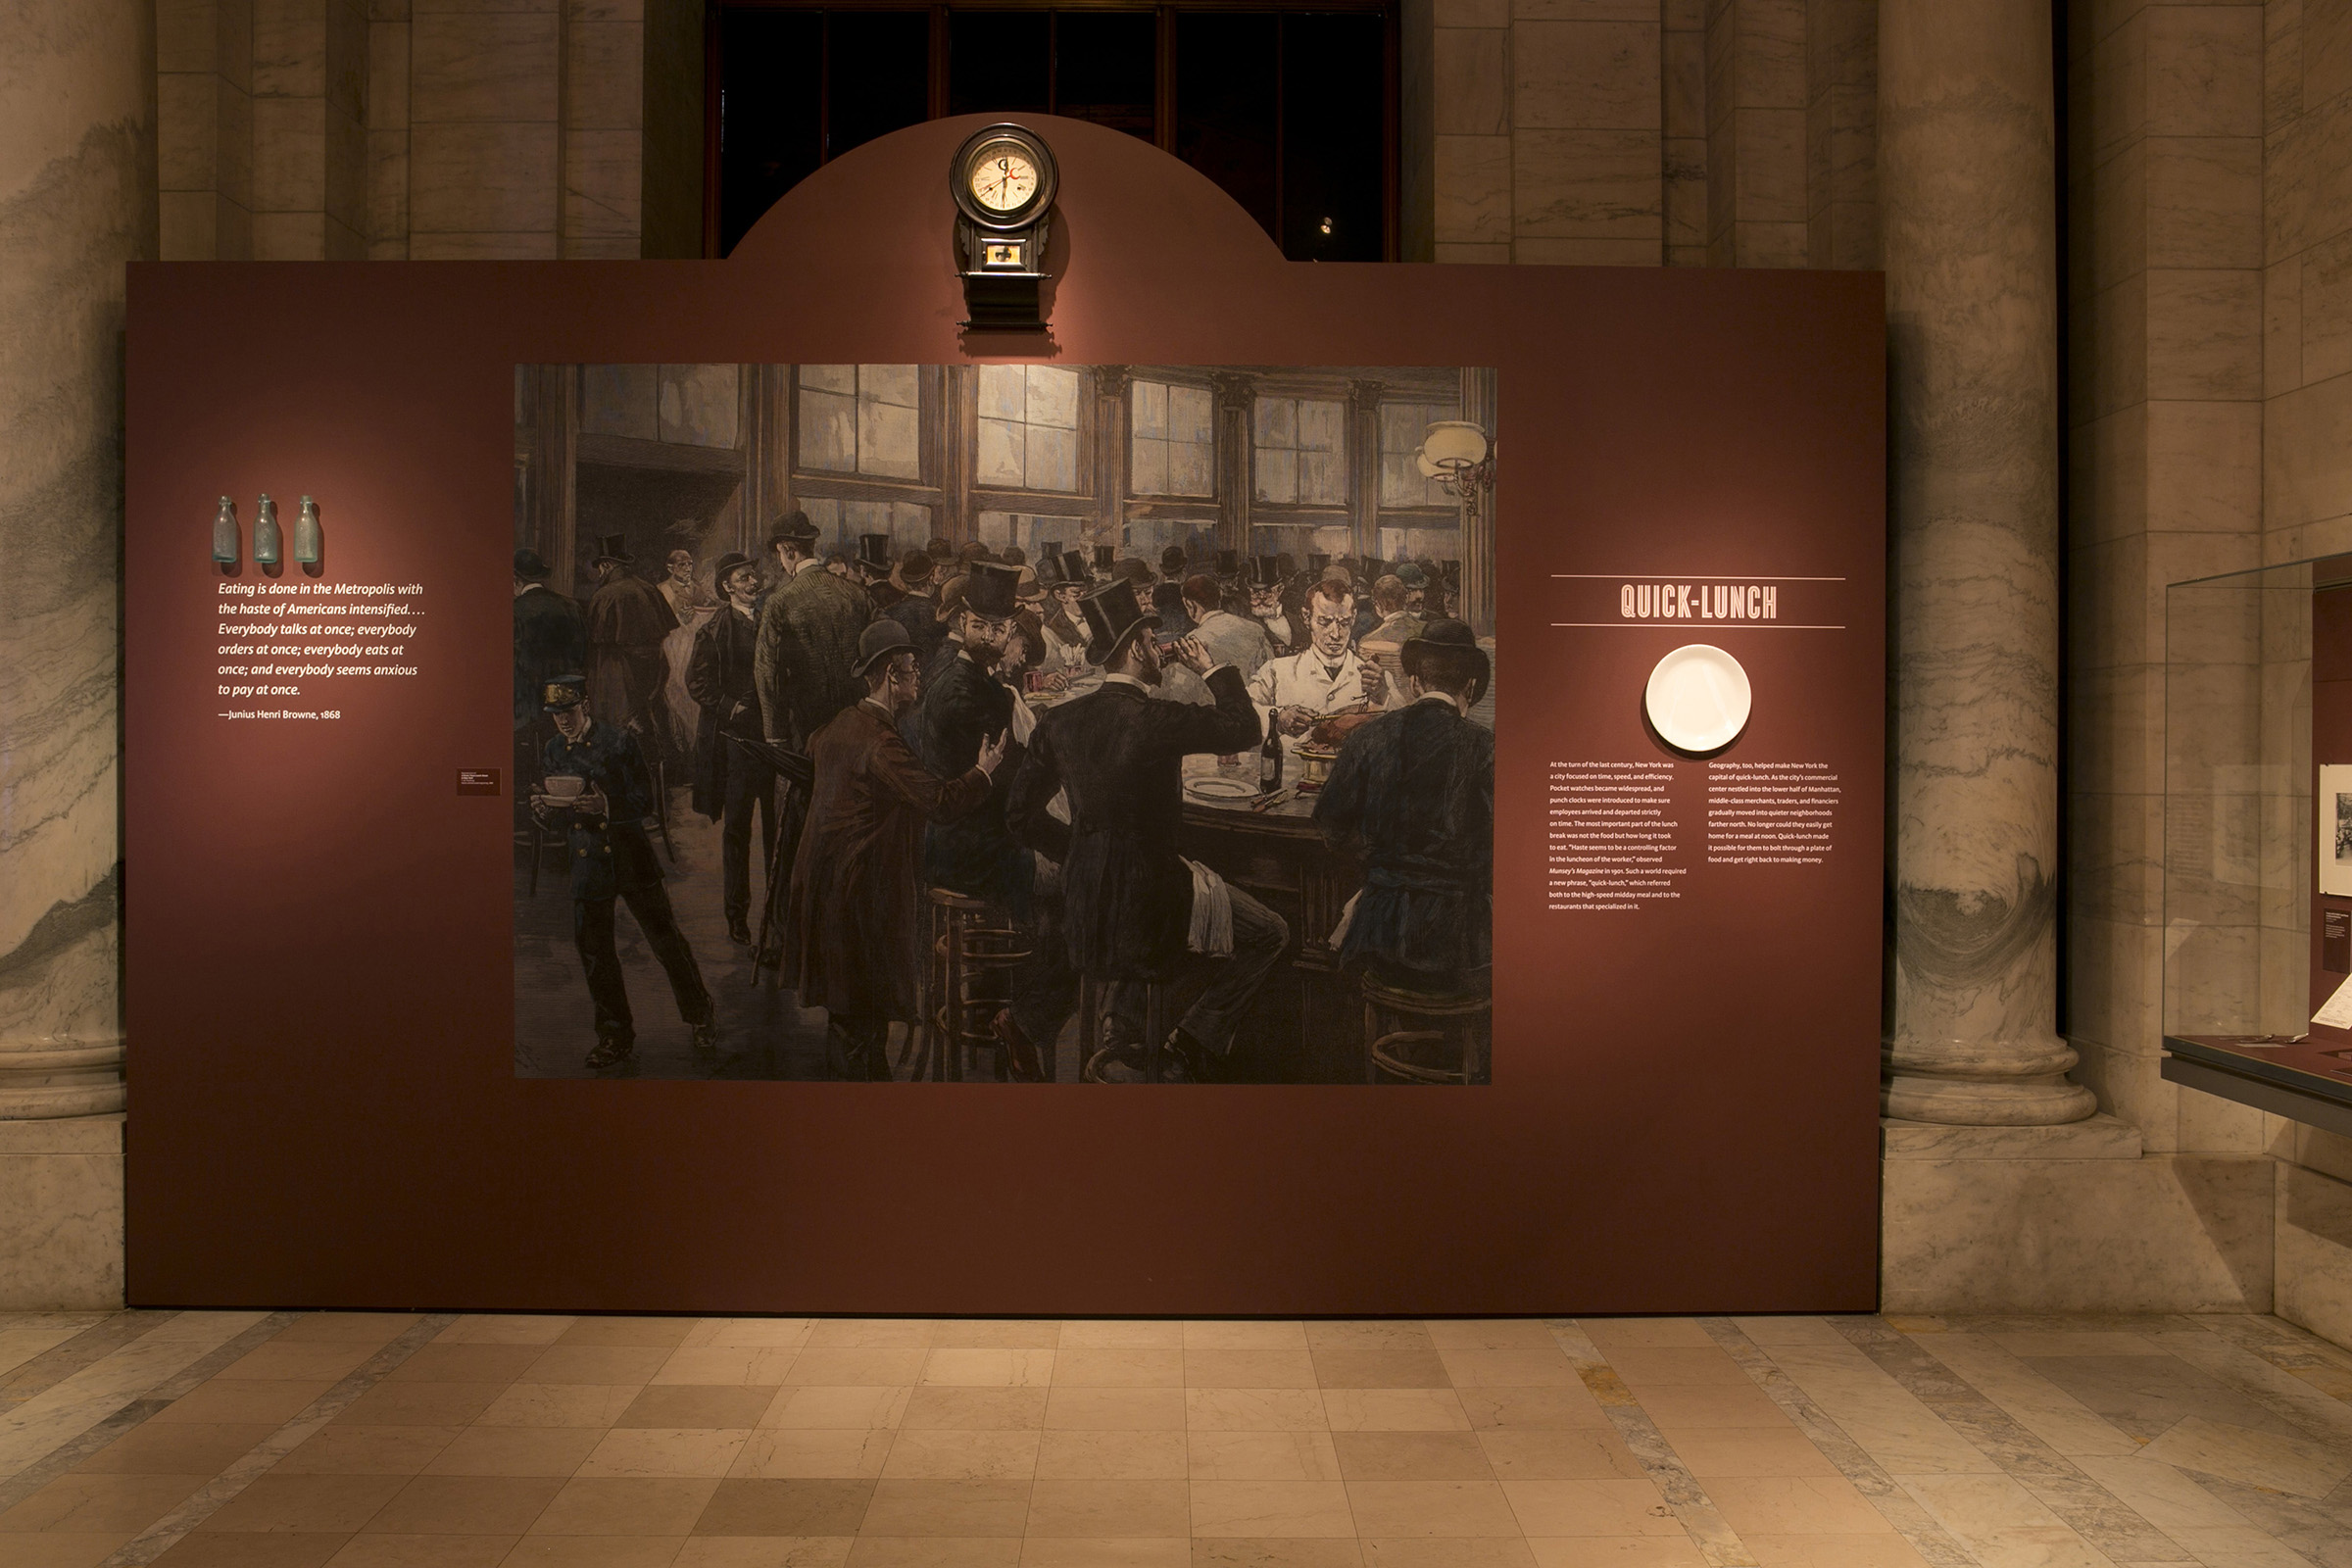 Lunch Hour Exhibition - A clock was placed in every section introduction as a visual leitmotif.